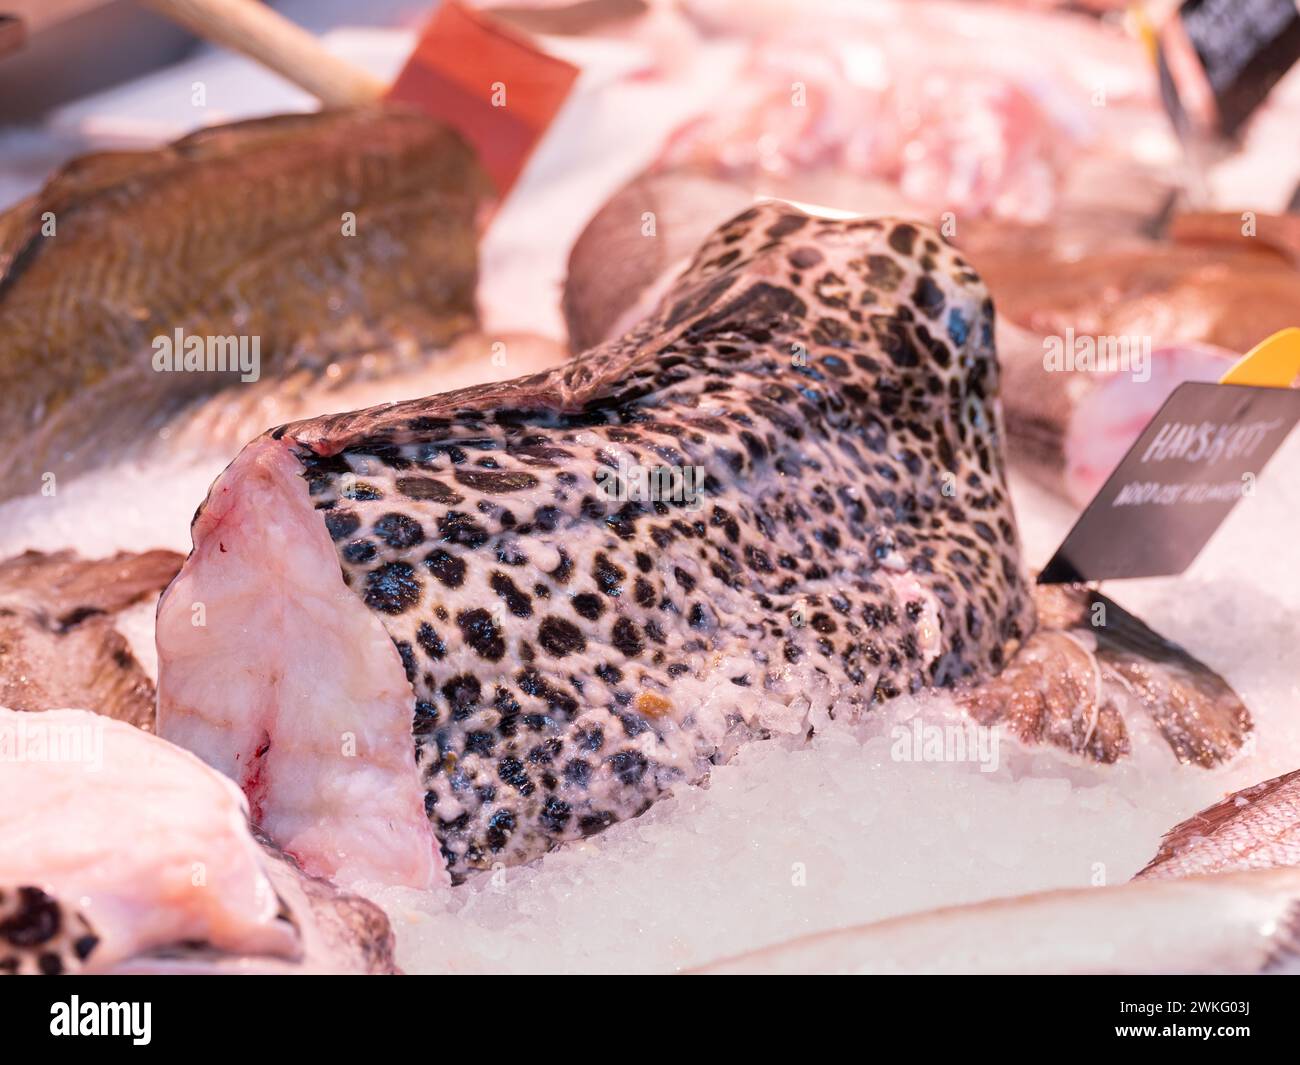 Piece of wolffish laying in ice in a fish market Stock Photo